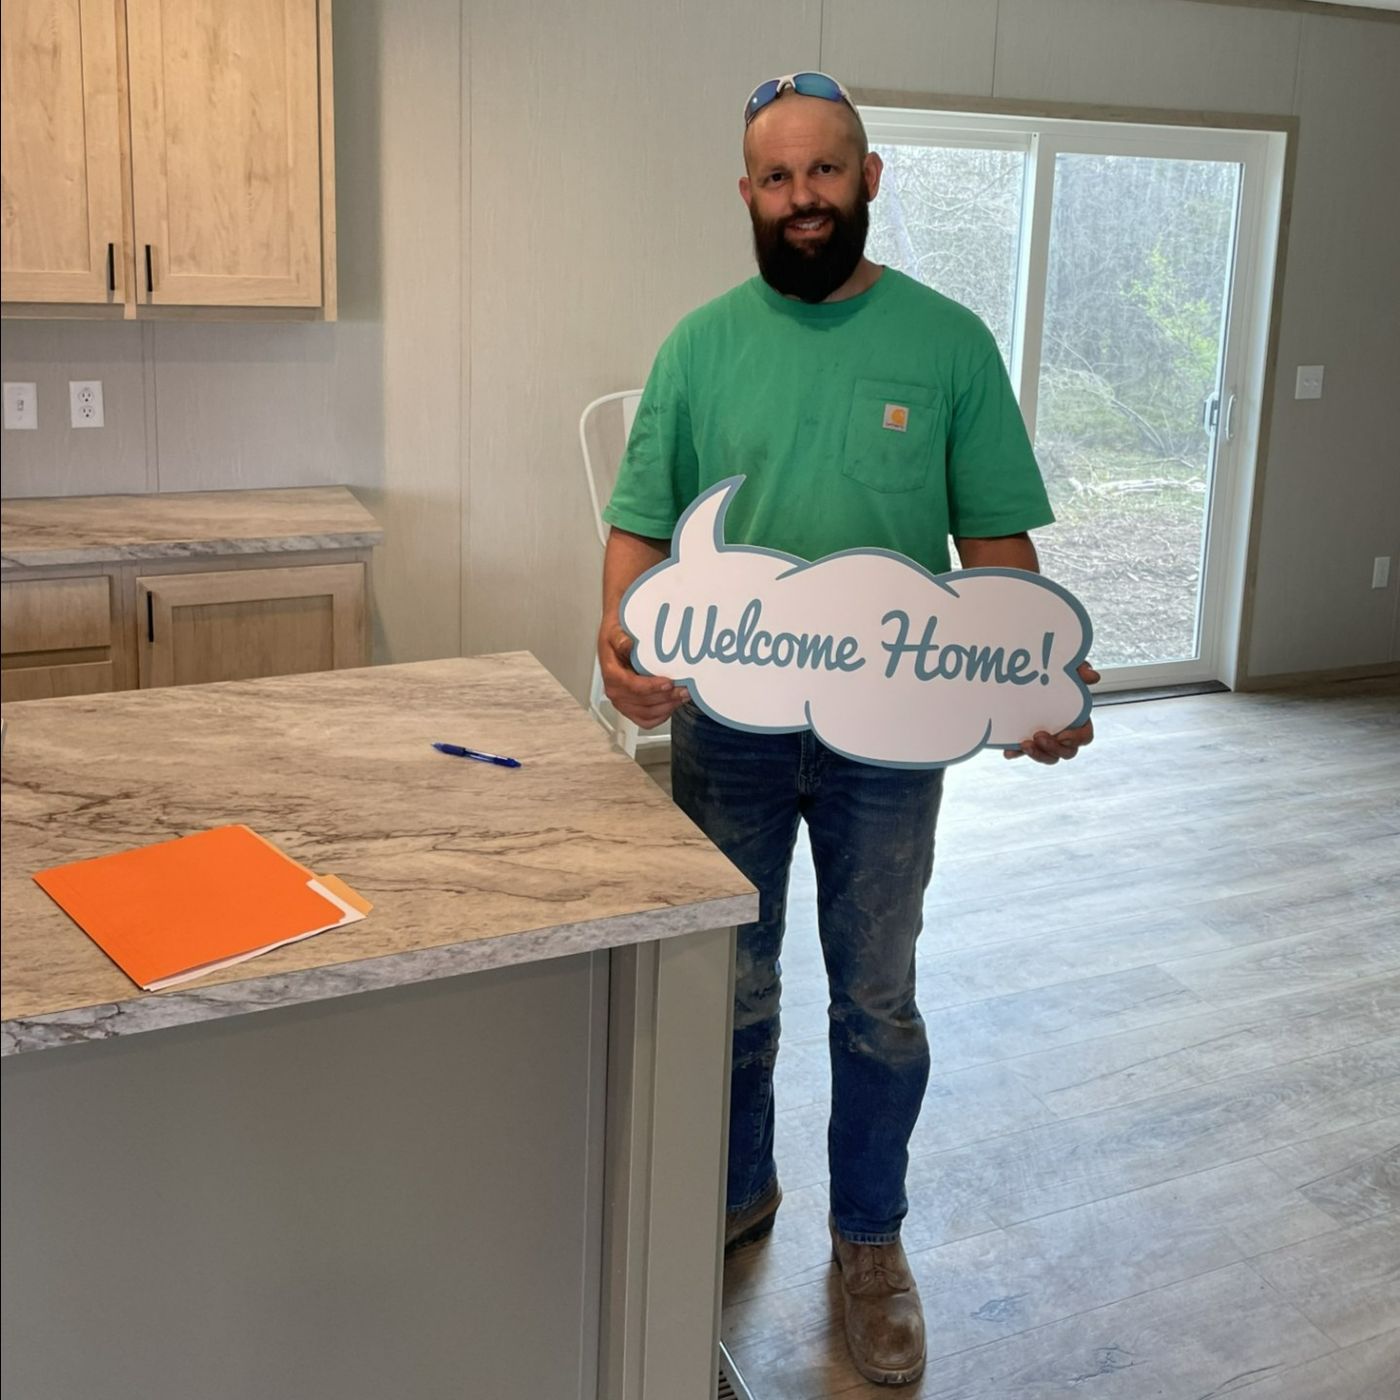 Lucas P. welcome home image